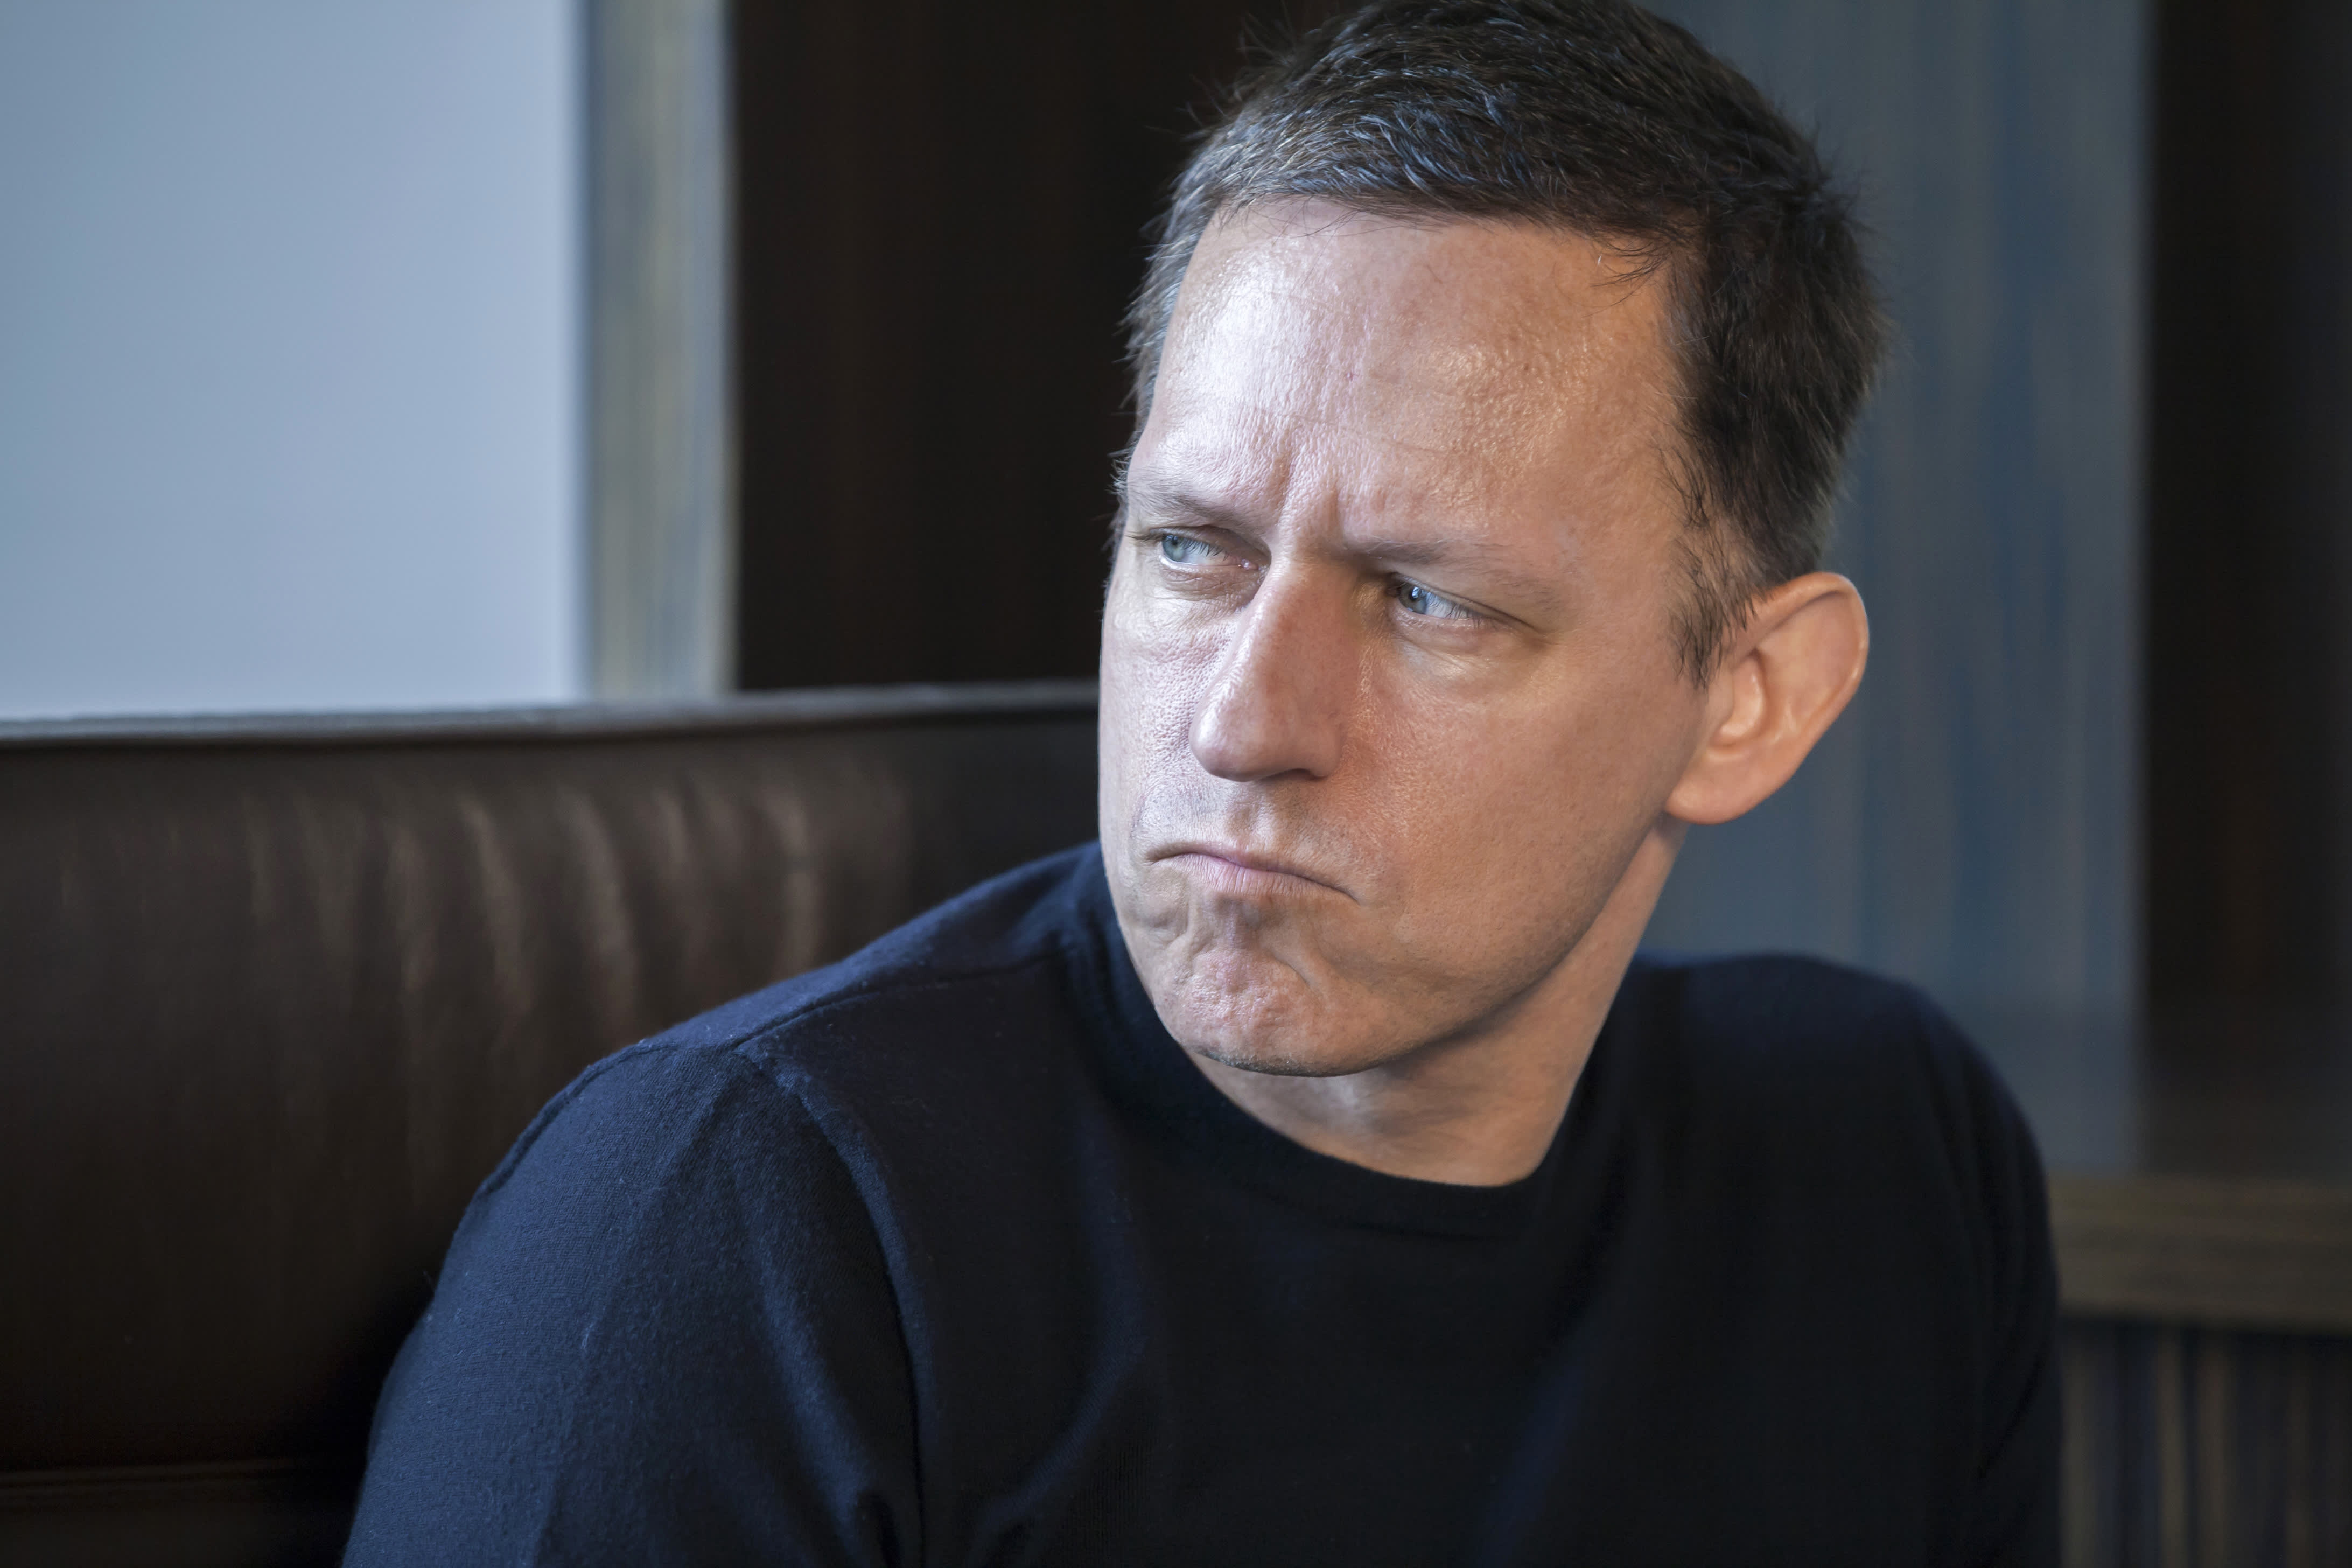 Peter Thiel says Donald Trump is a 'fighter' but he will be 'inclusive'